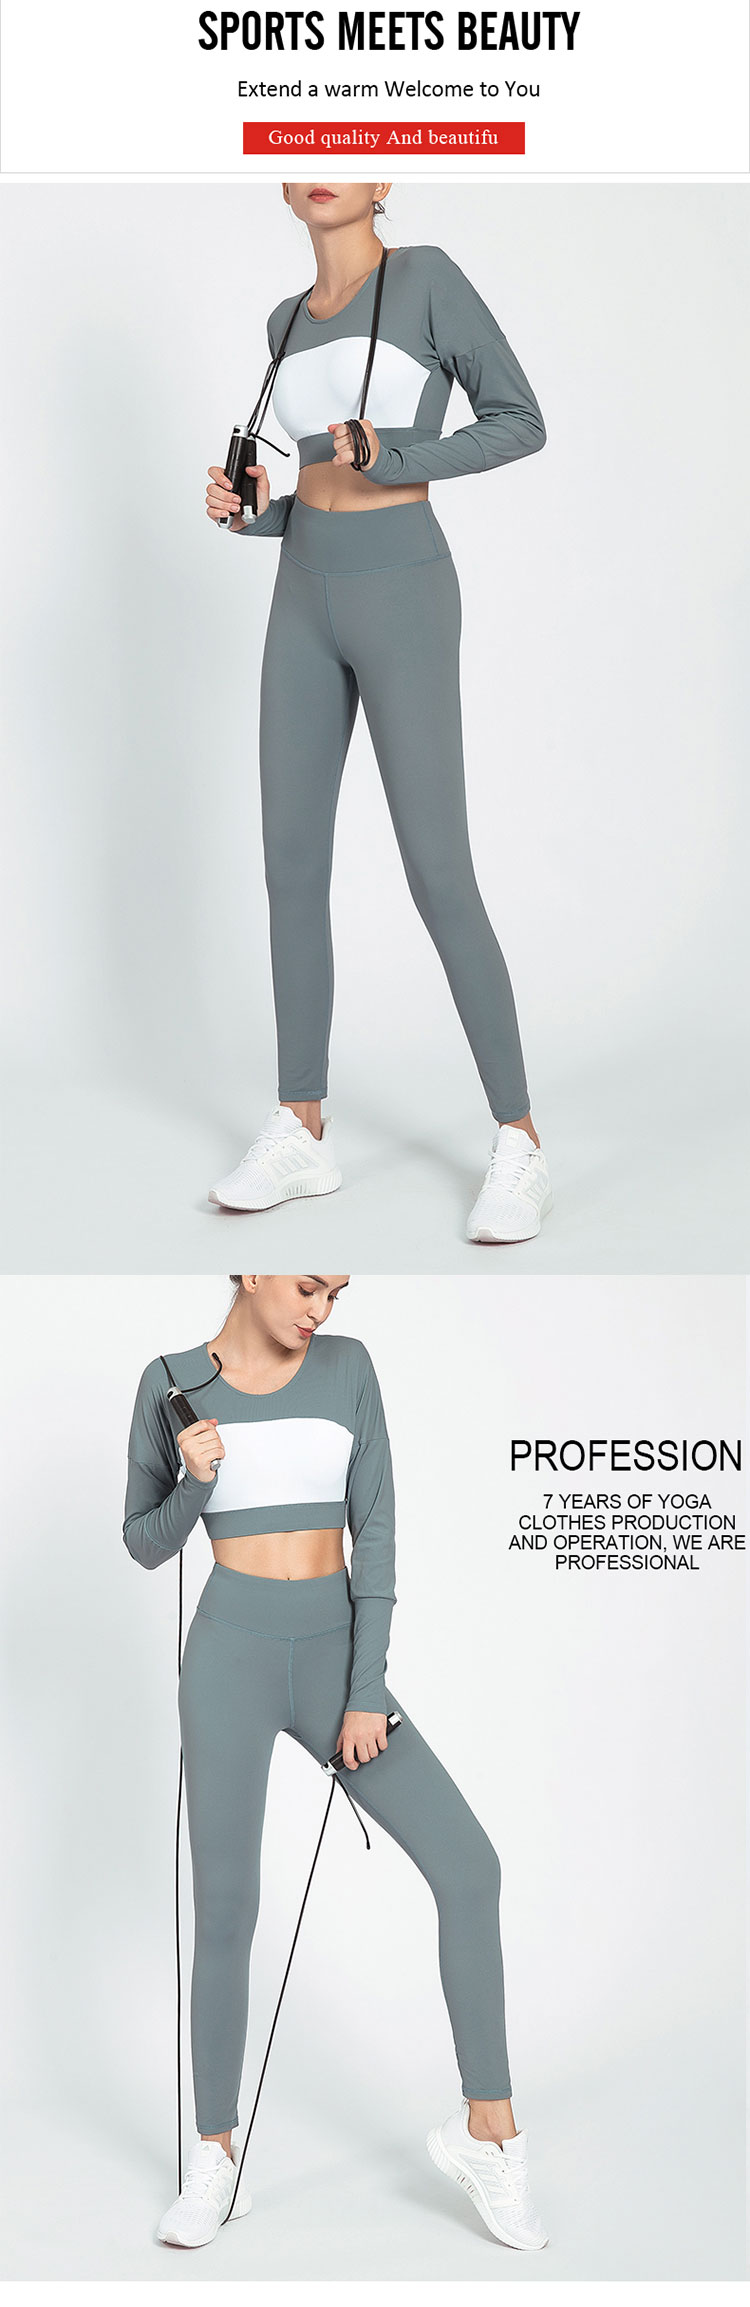 High-rise-gym-leggings,-with-their-black-and-white-colors-and-flowing